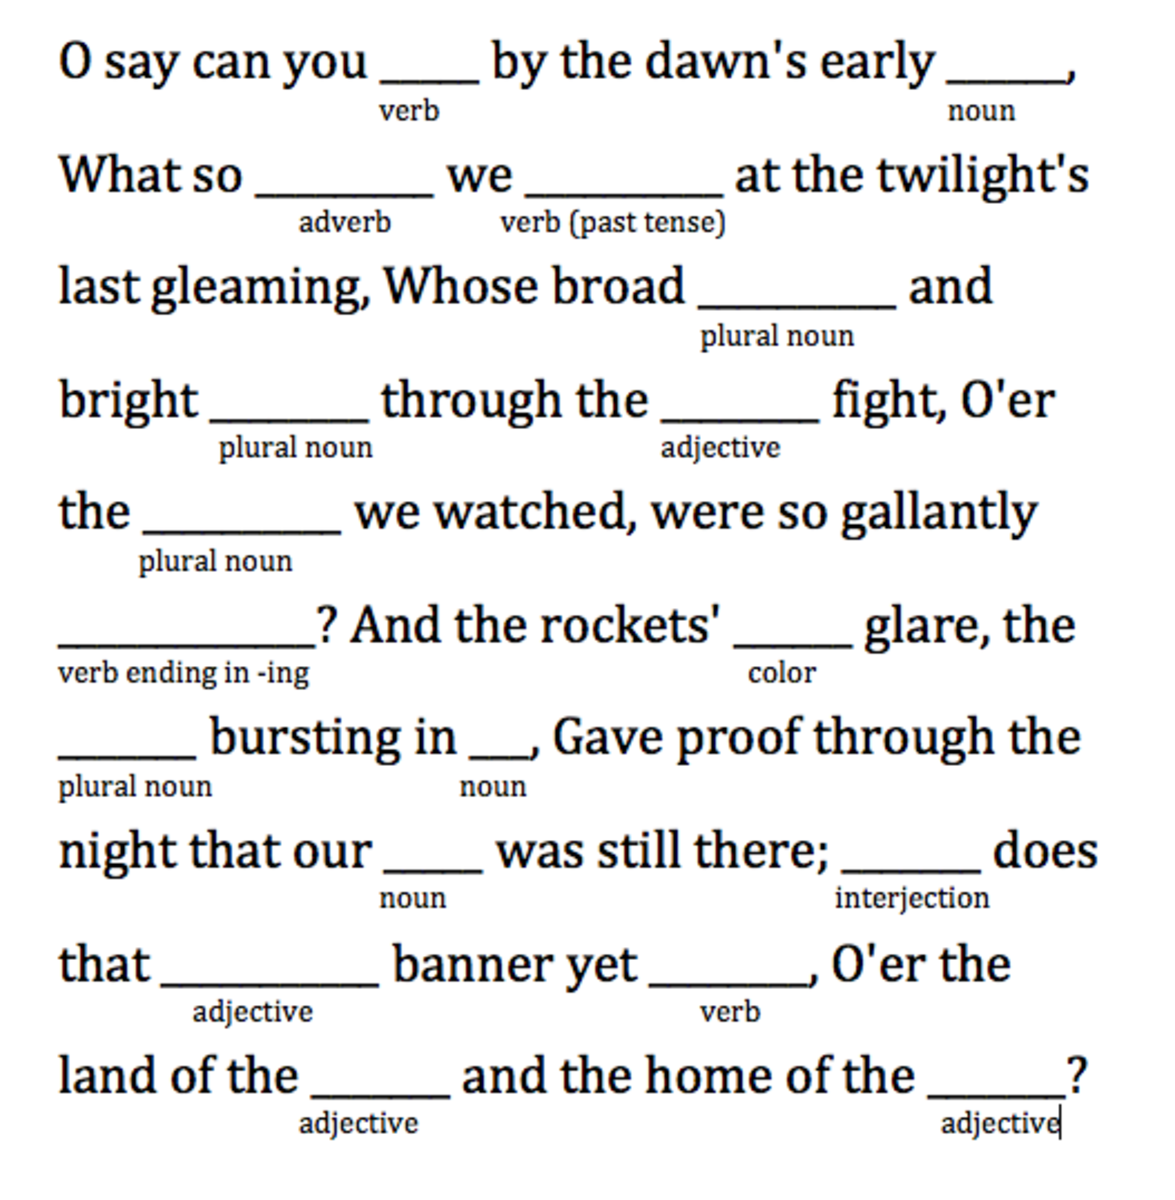 The Star-Spangled Banner is in the public domain, so it was easy to grab the lyrics online and quickly pull some words out.